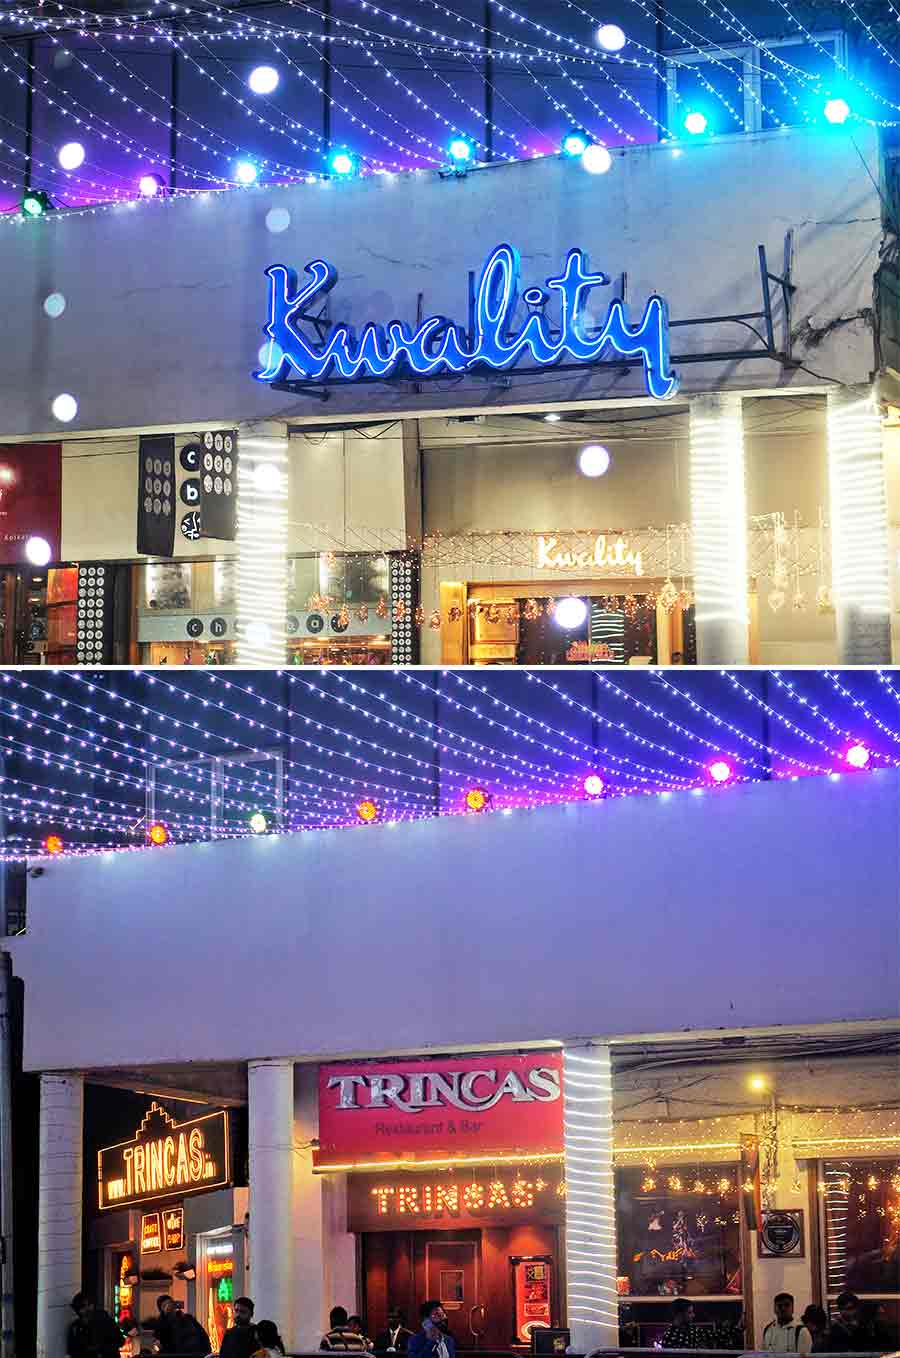 Legacy F&B outlets like Kwality and Trincas have joined in the festivities with their own decorations. Getting a table at any of Park Street’s iconic venues over the coming week will be a tough task, as Kolkata’s favourite food street gets into the spirit of the season